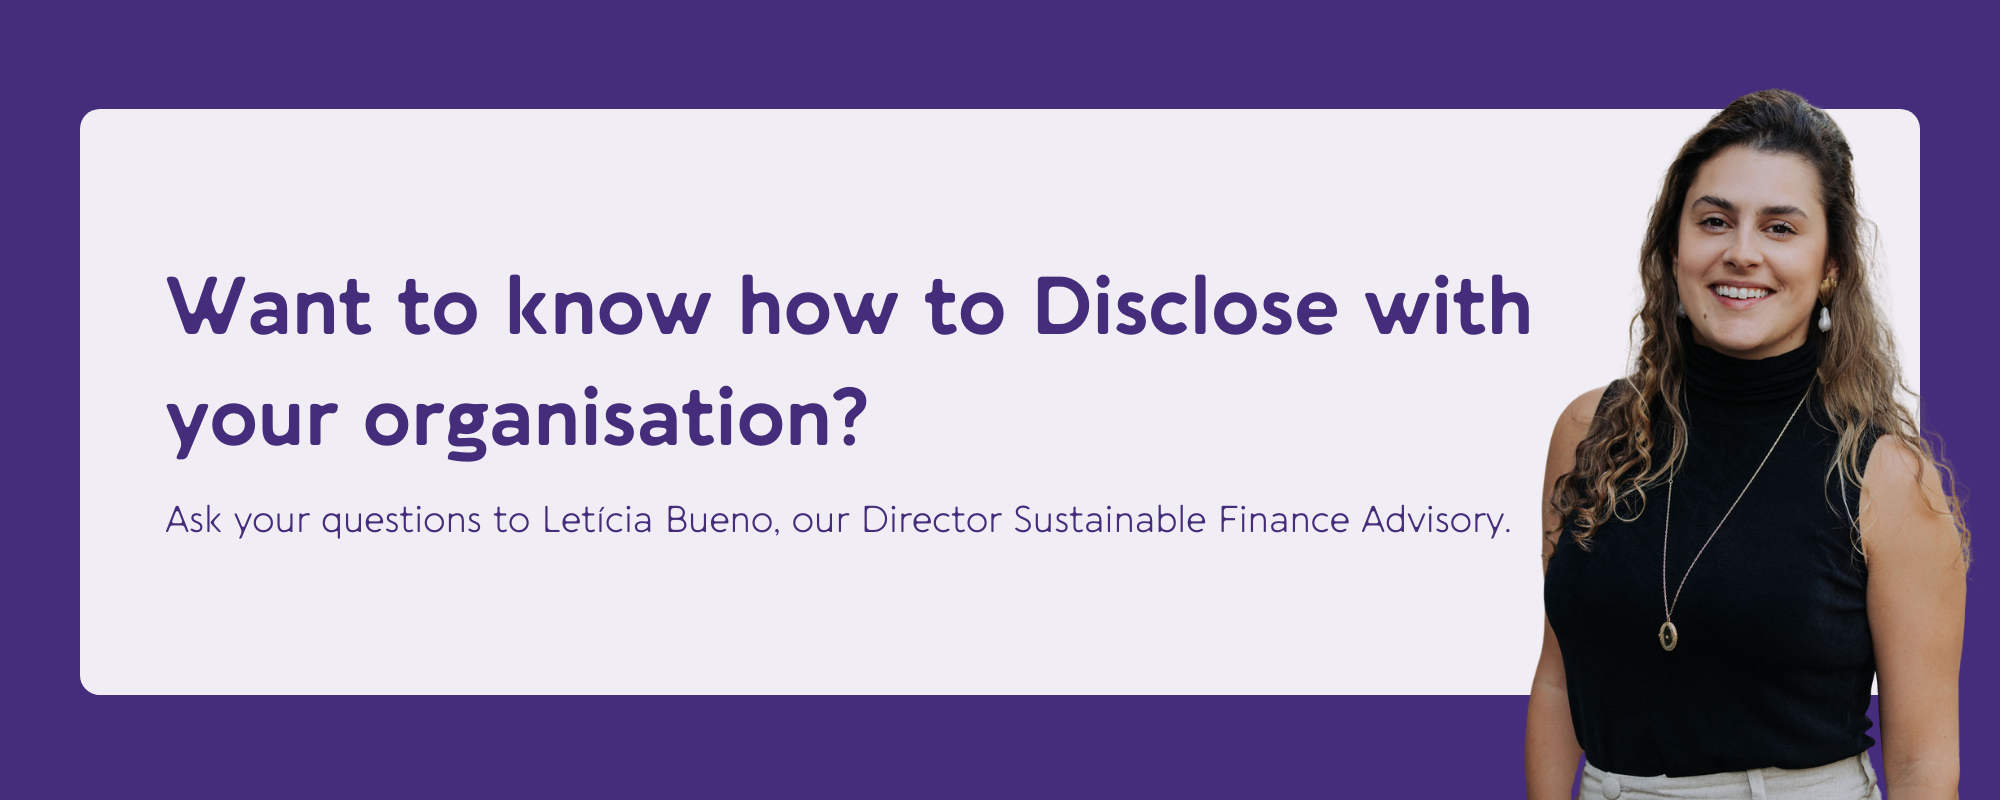 Want to know how to Disclose with your organisation?